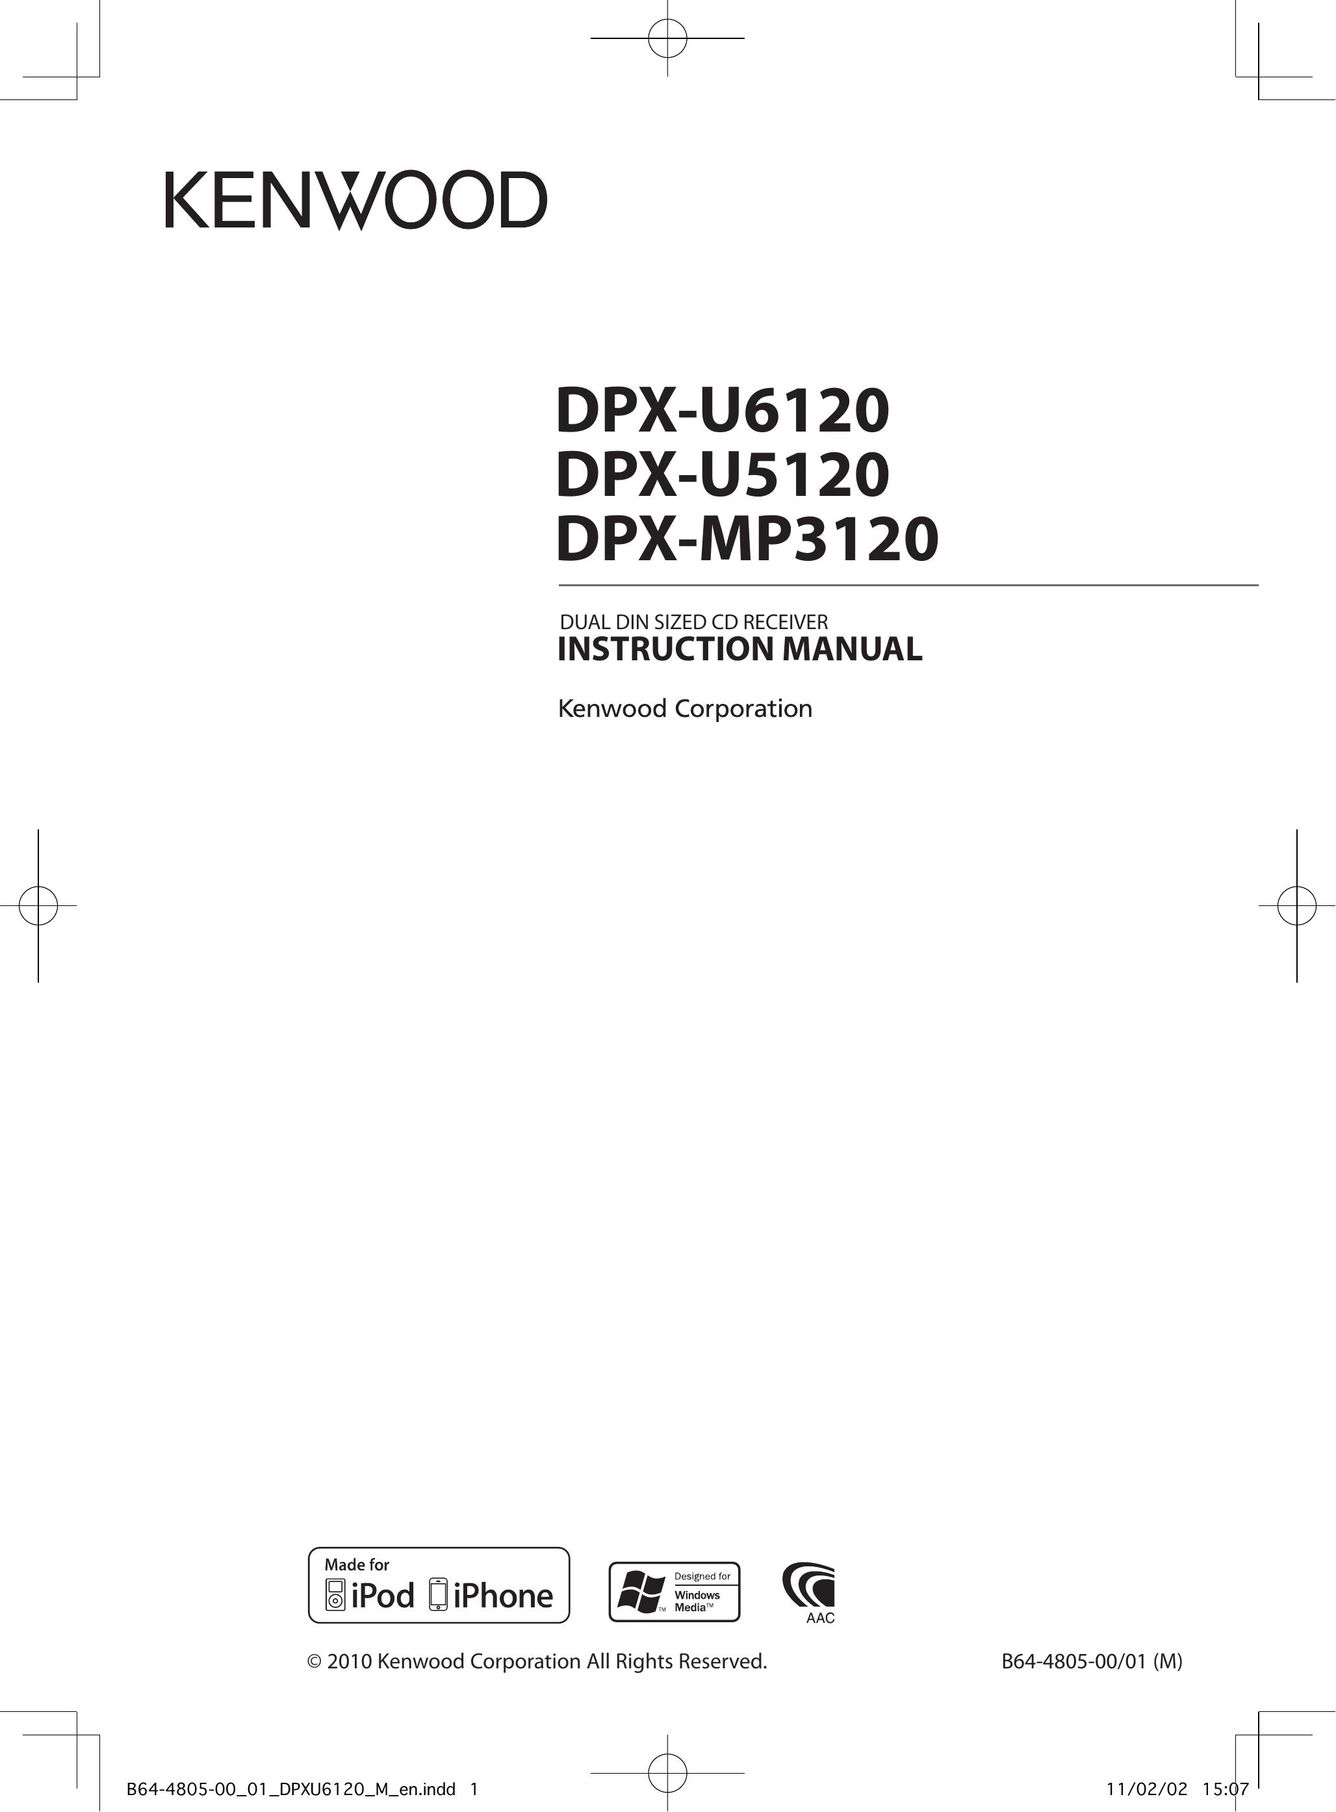 Kenwood DPX-MP3120 Car Stereo System User Manual